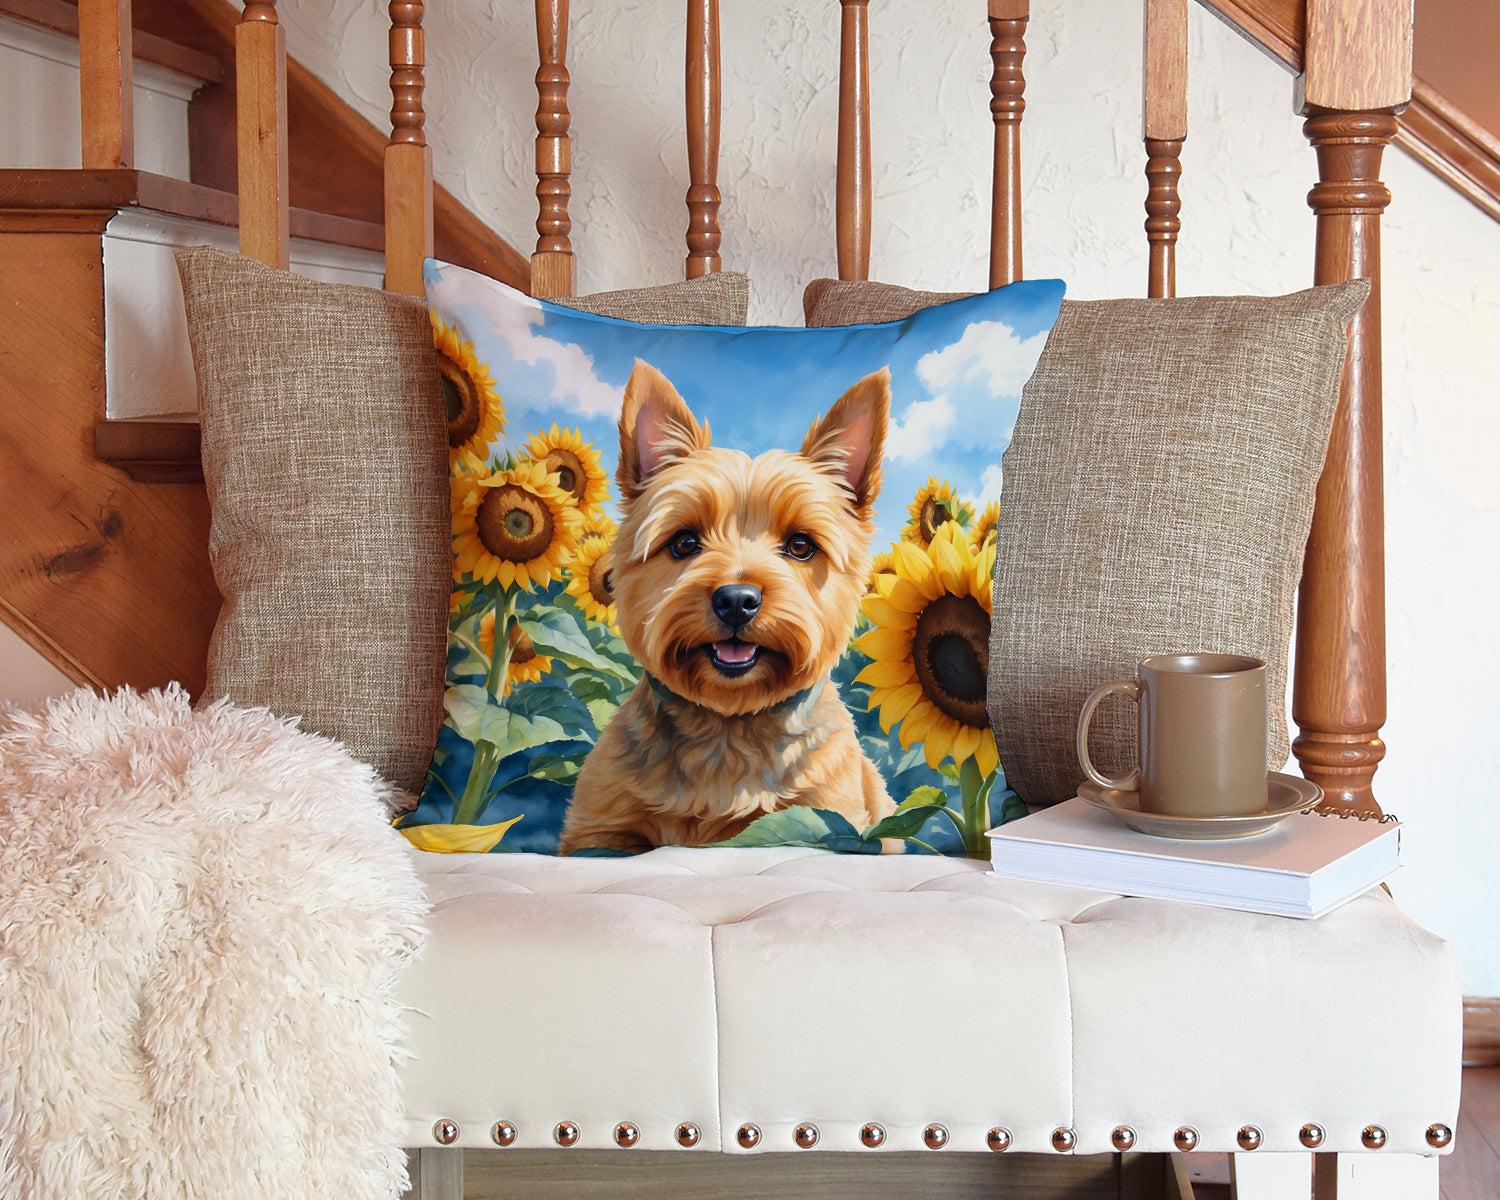 Norwich Terrier in Sunflowers Throw Pillow